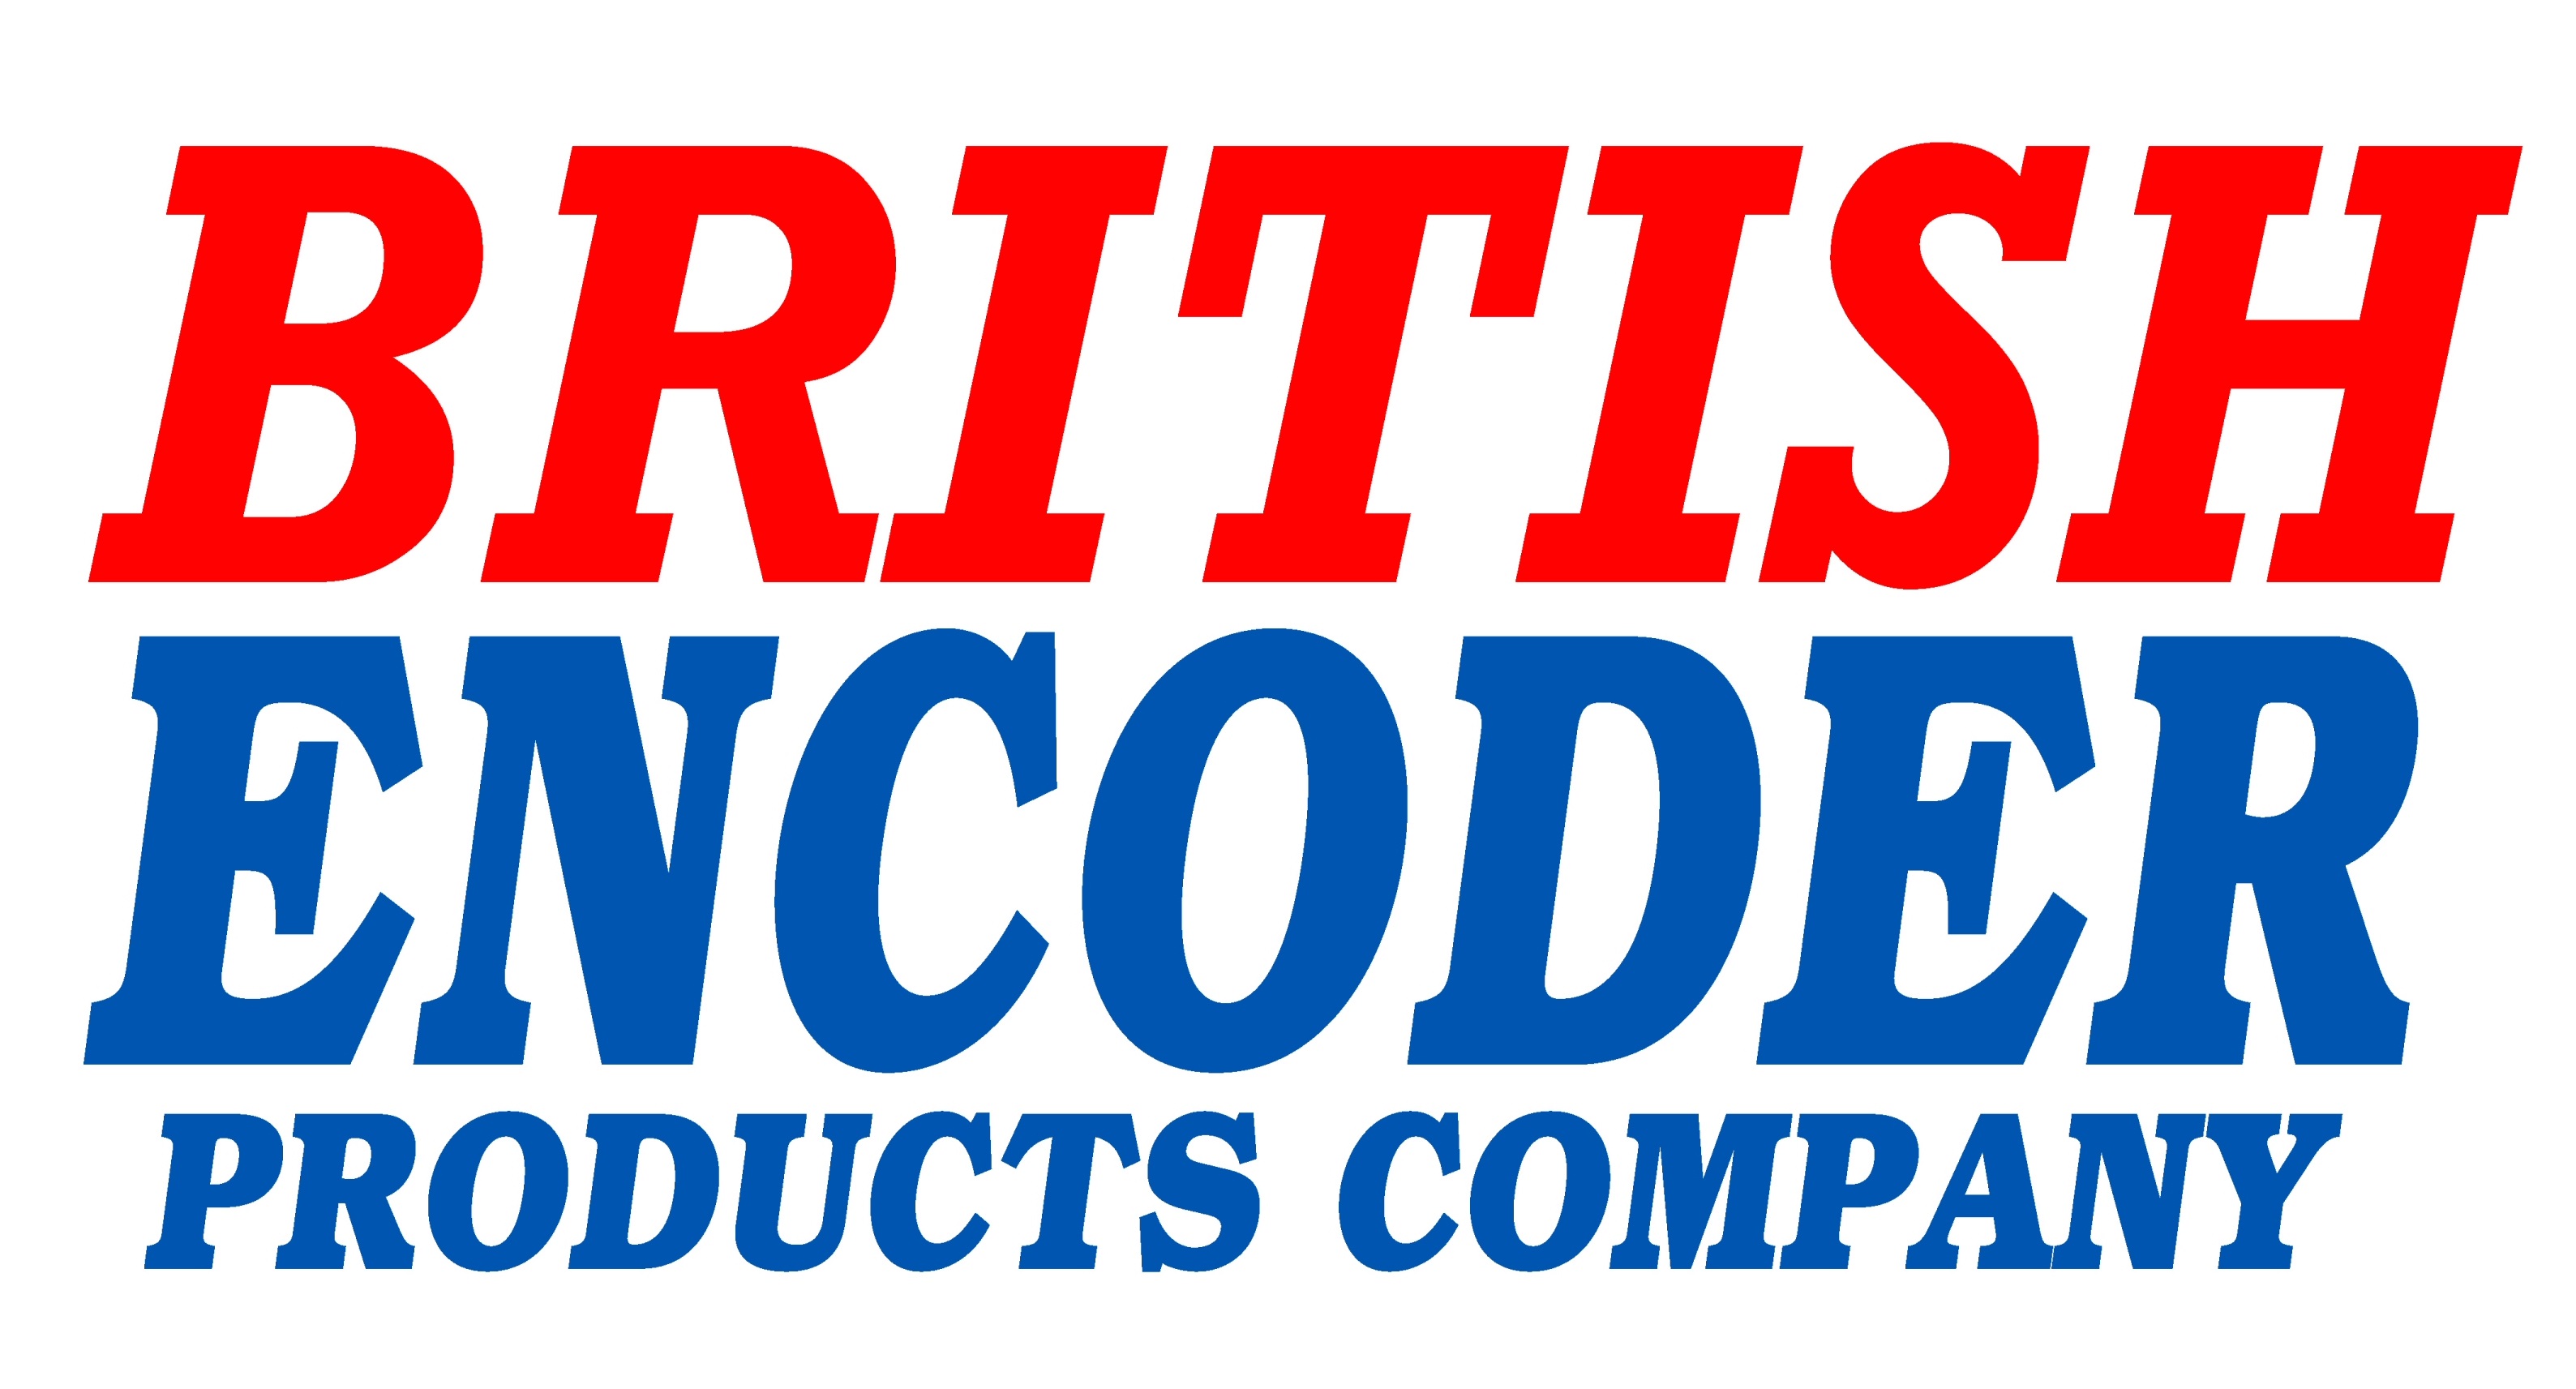 British Encoder Products Co.